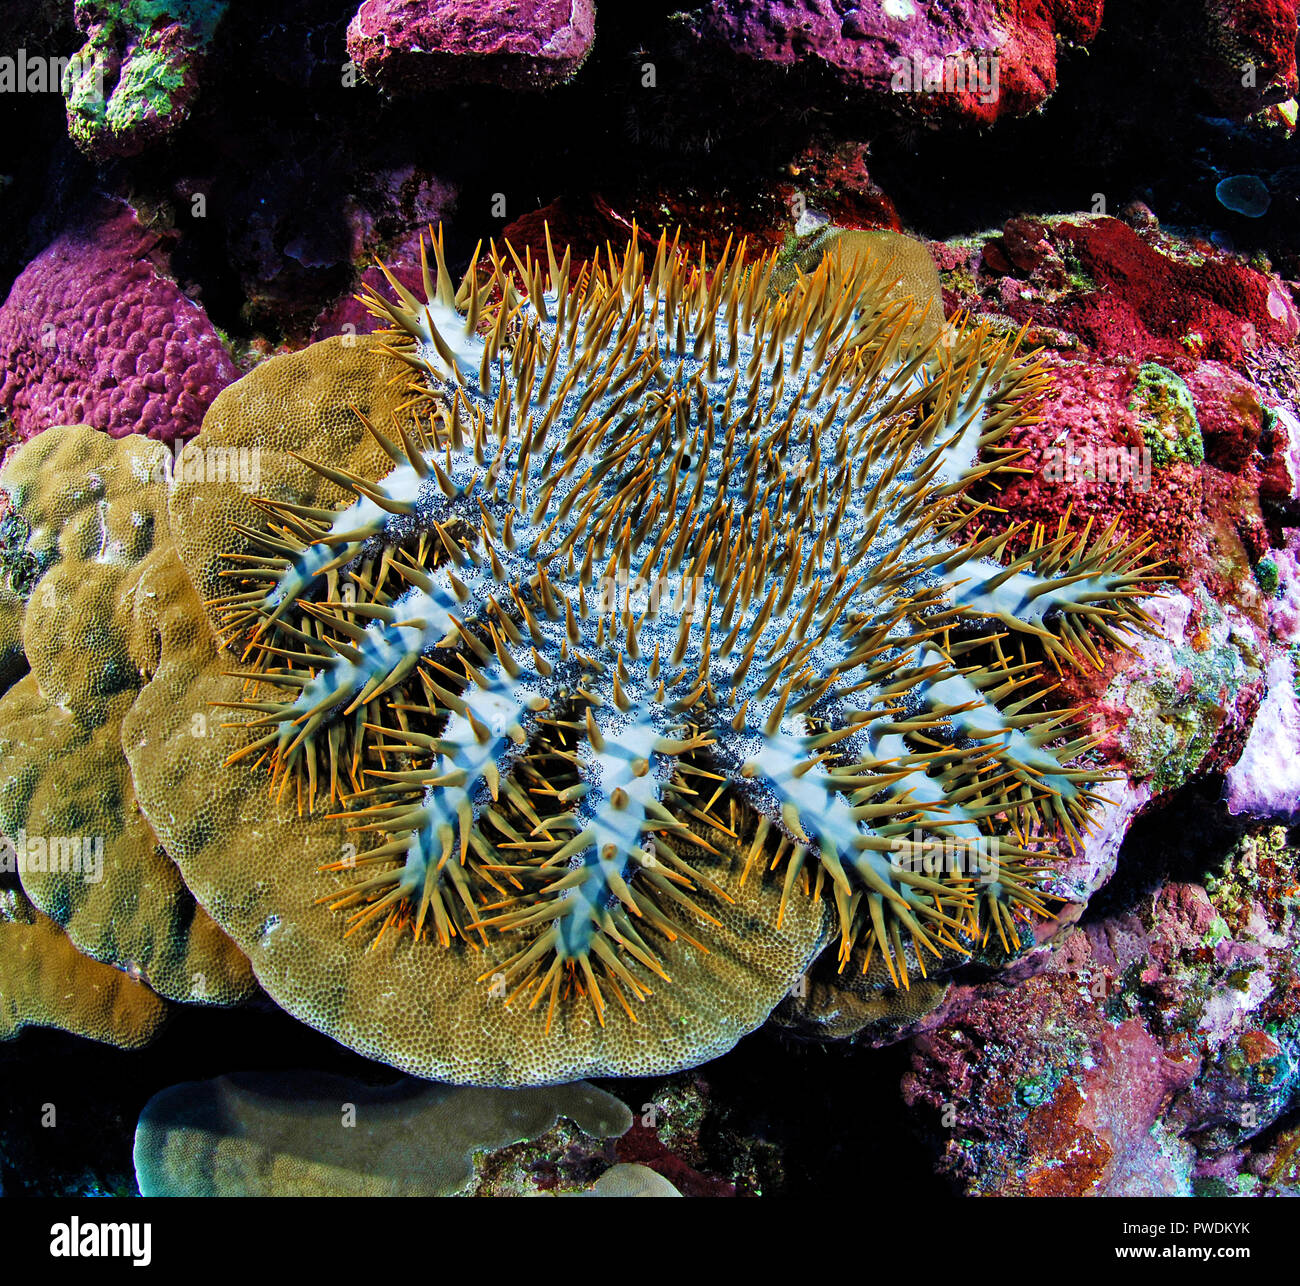 Crown-of-thorns starfish (Acanthaster planci) feeds on live coral, Yap island, Micronesia Stock Photo